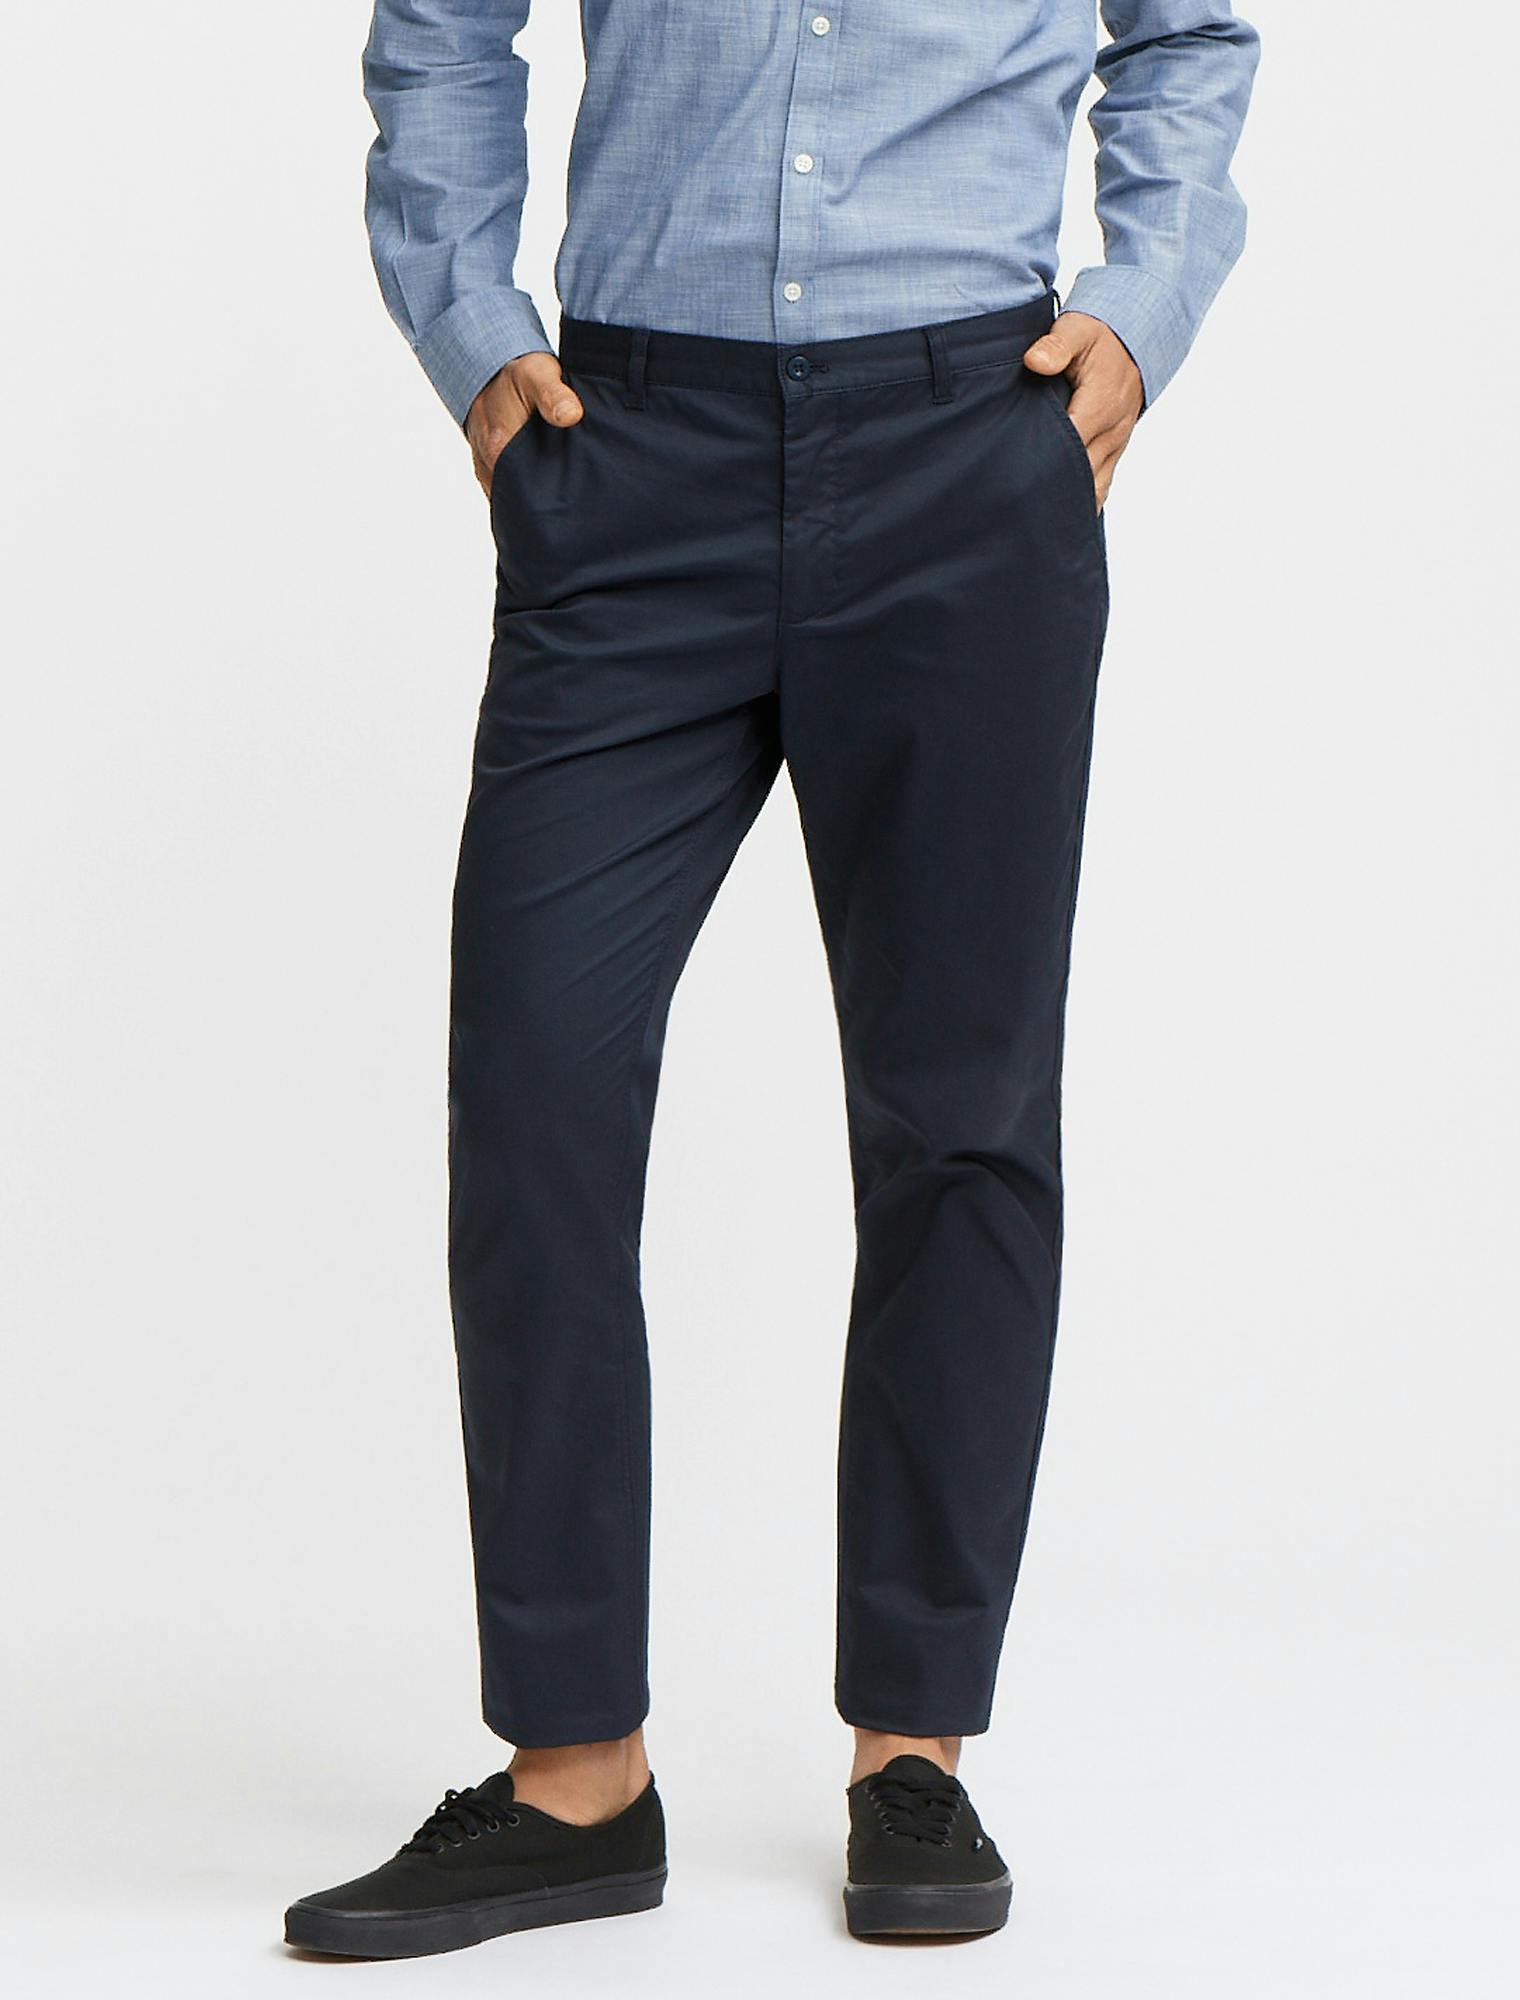 Men's Todd Chino Pant - Navy Blue Trousers